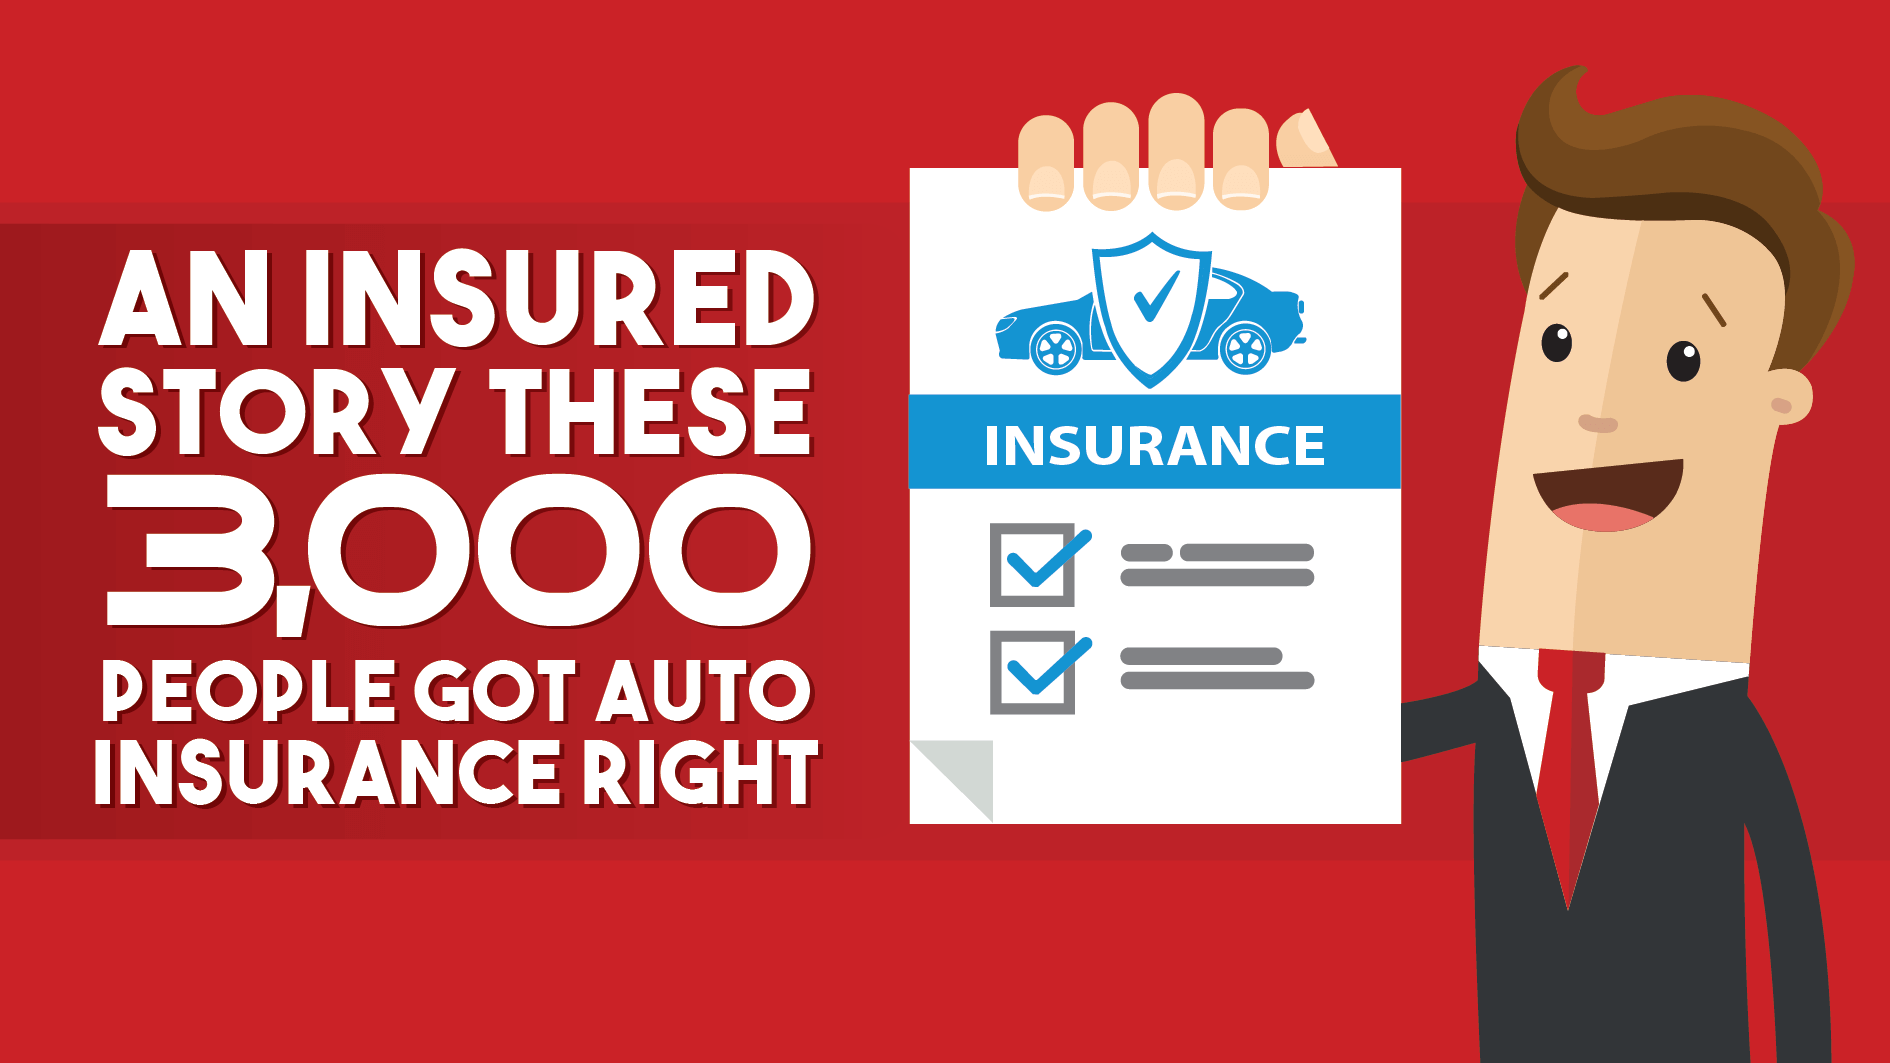 An Insured Story: These 3,000 People Got Auto Insurance Right